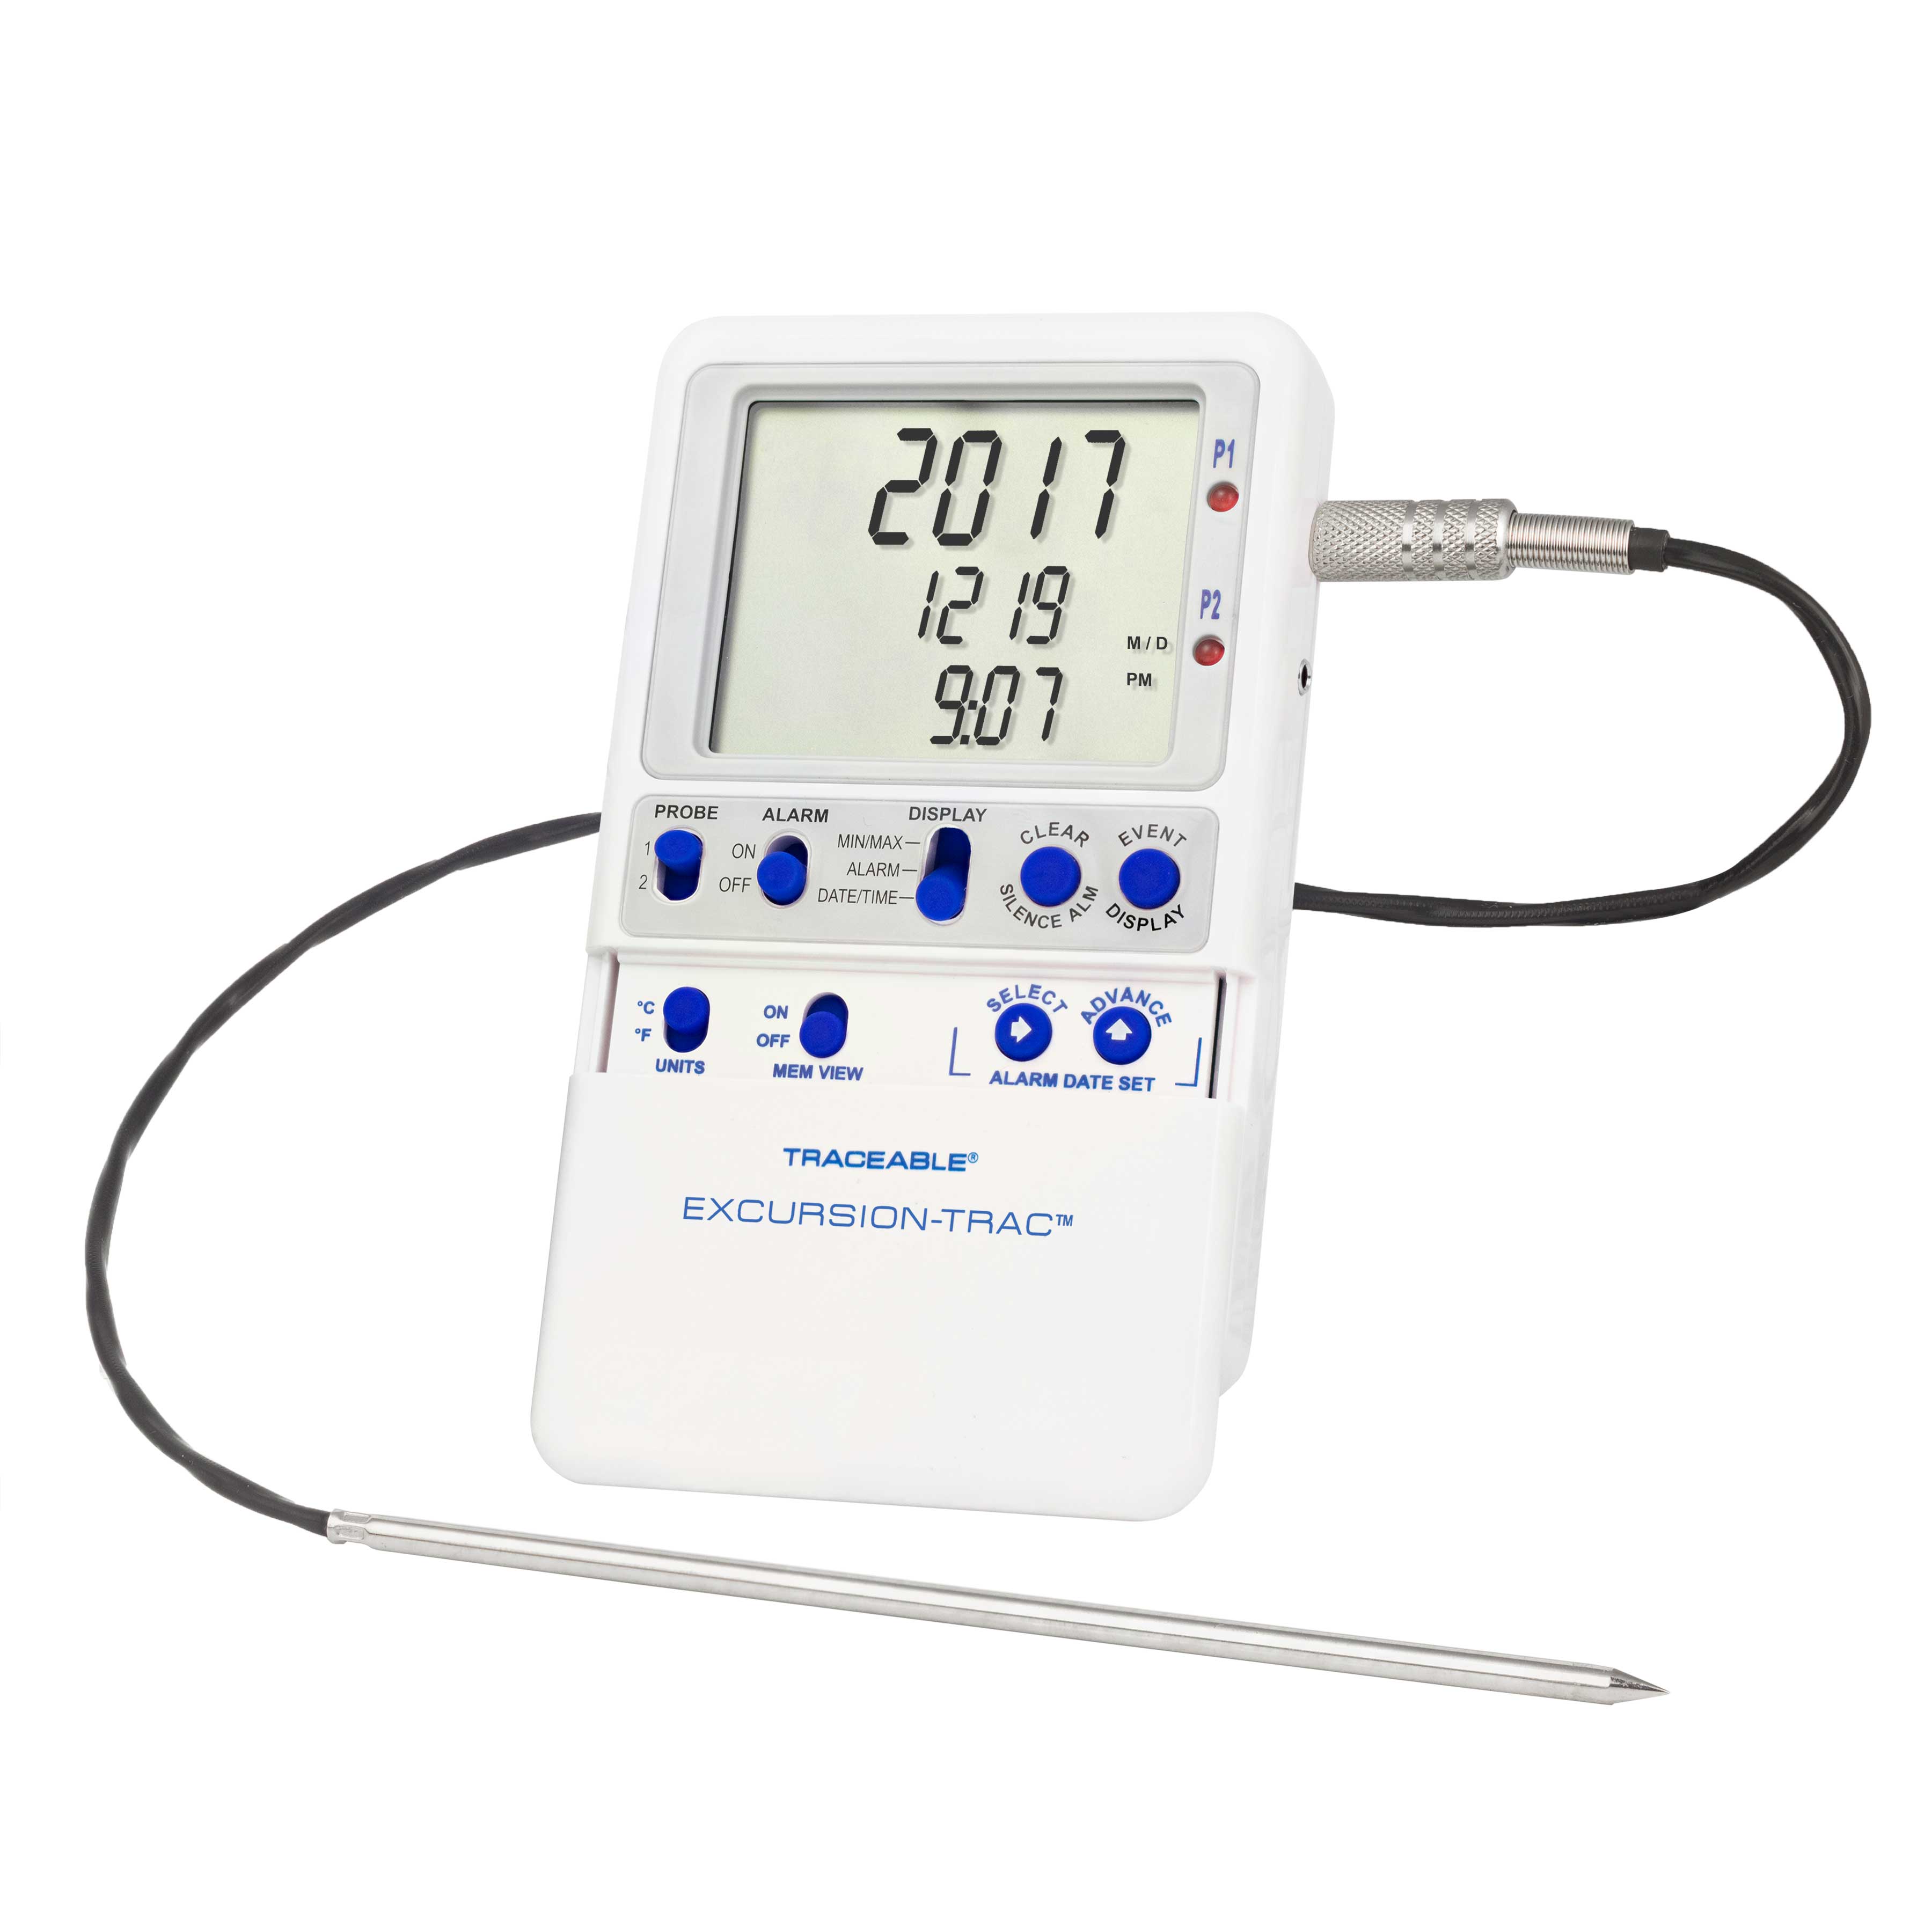 Excursion-Trac datalogging digital thermometer. TRACEABLE. Range: –90.00 to 105.00°C. Accuracy: ±0.2°C. Resolution: 0.01°C. Probes: Platinum RTD sensors, 1 stainless-steel 316 Probe. Application: Ultra-freezers